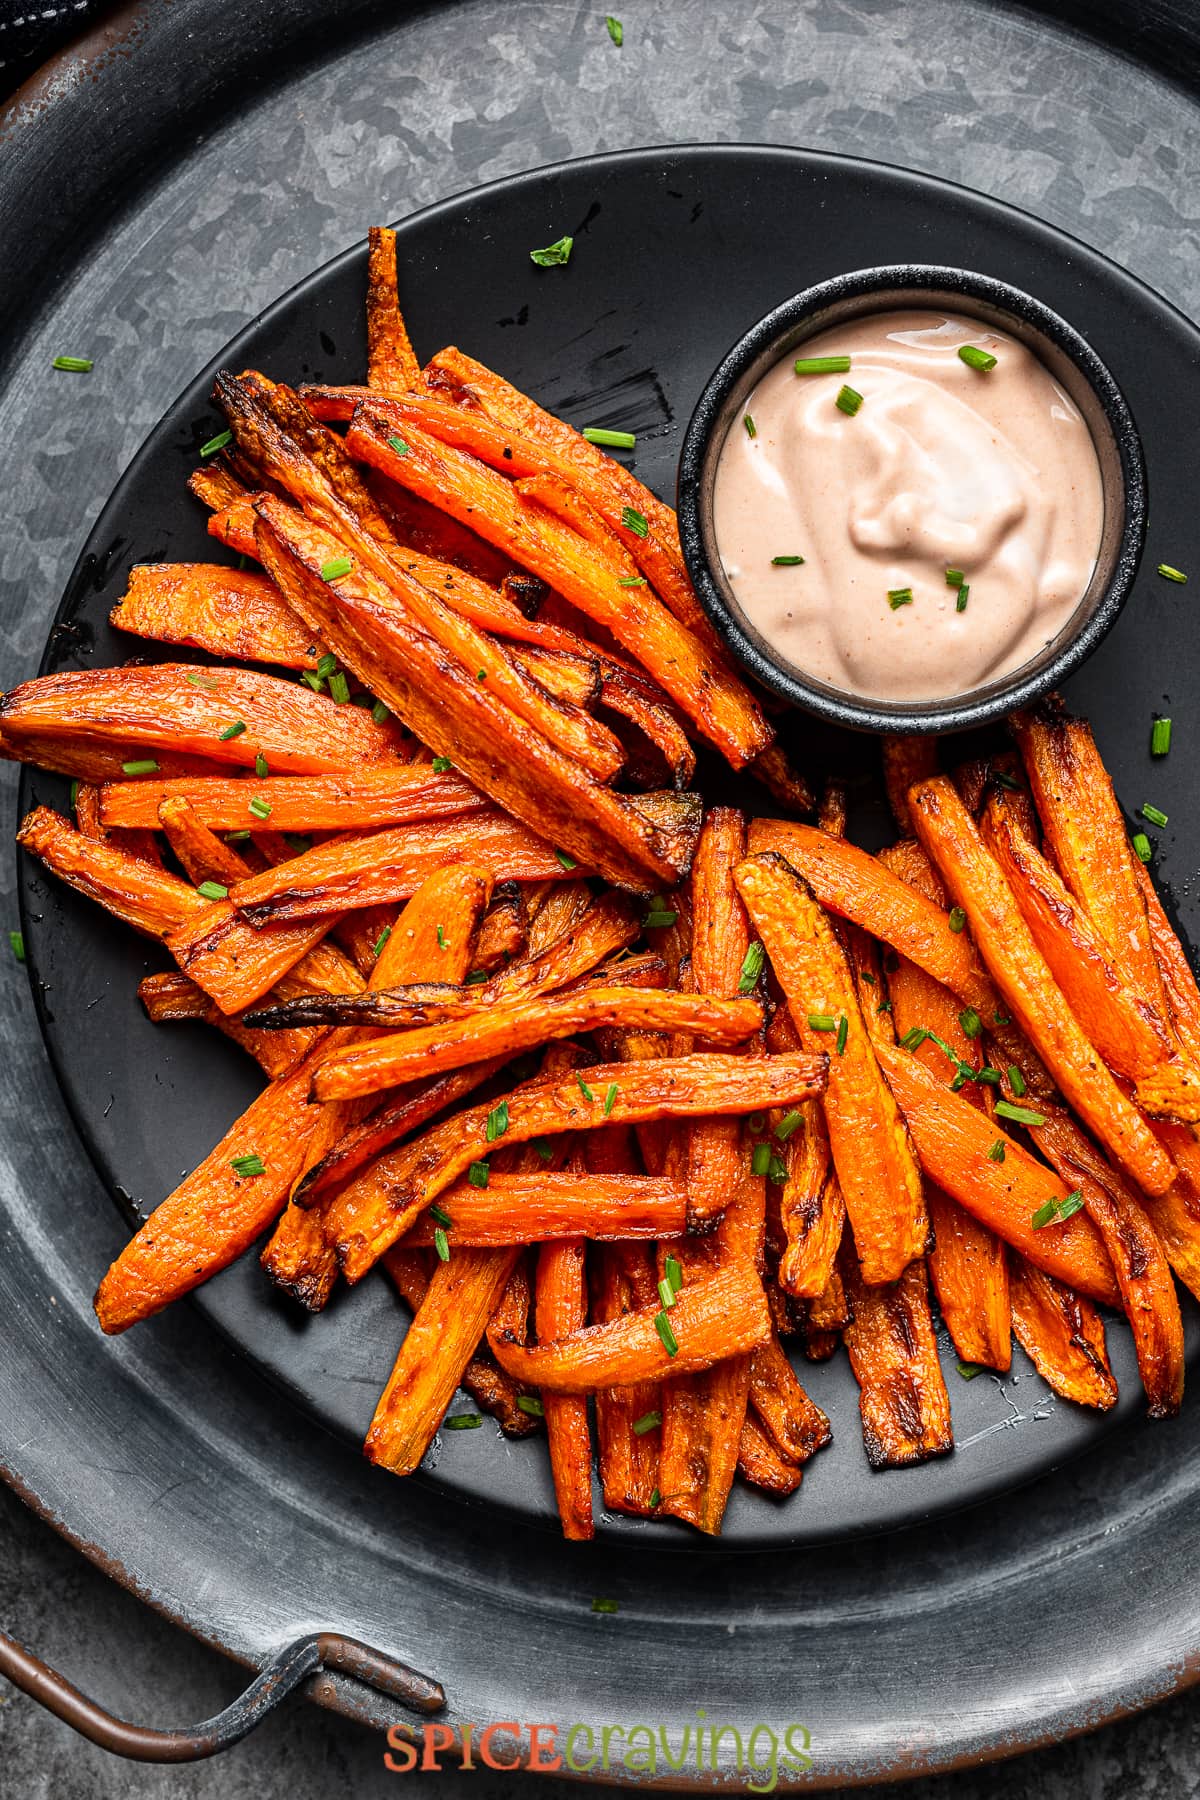 Roasted air fried carrot fries with dipping sauce on black plate